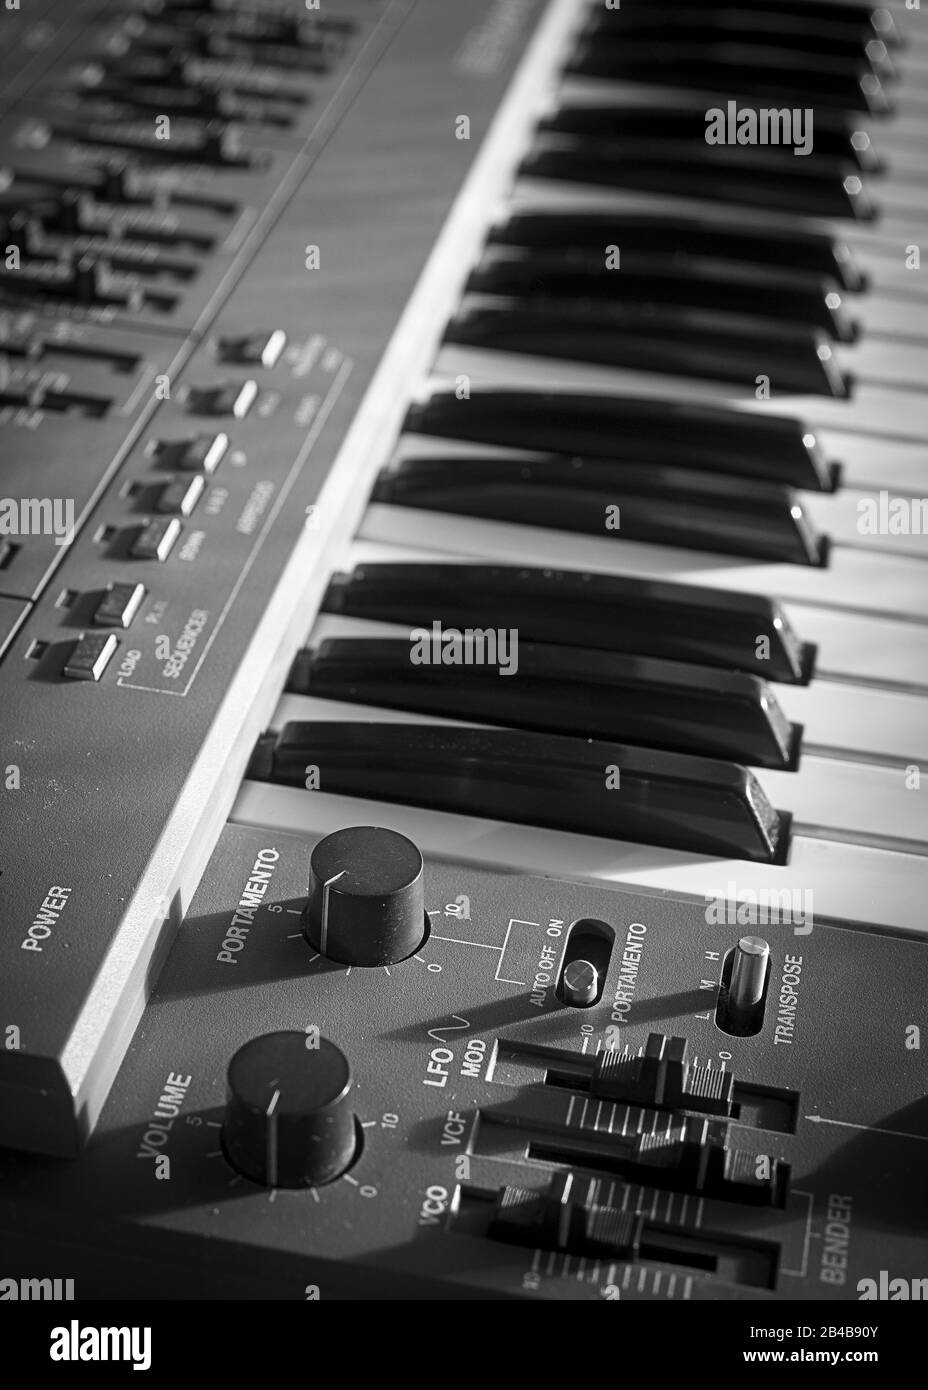 Roland SH101 Analogue Synthesiser Stock Photo